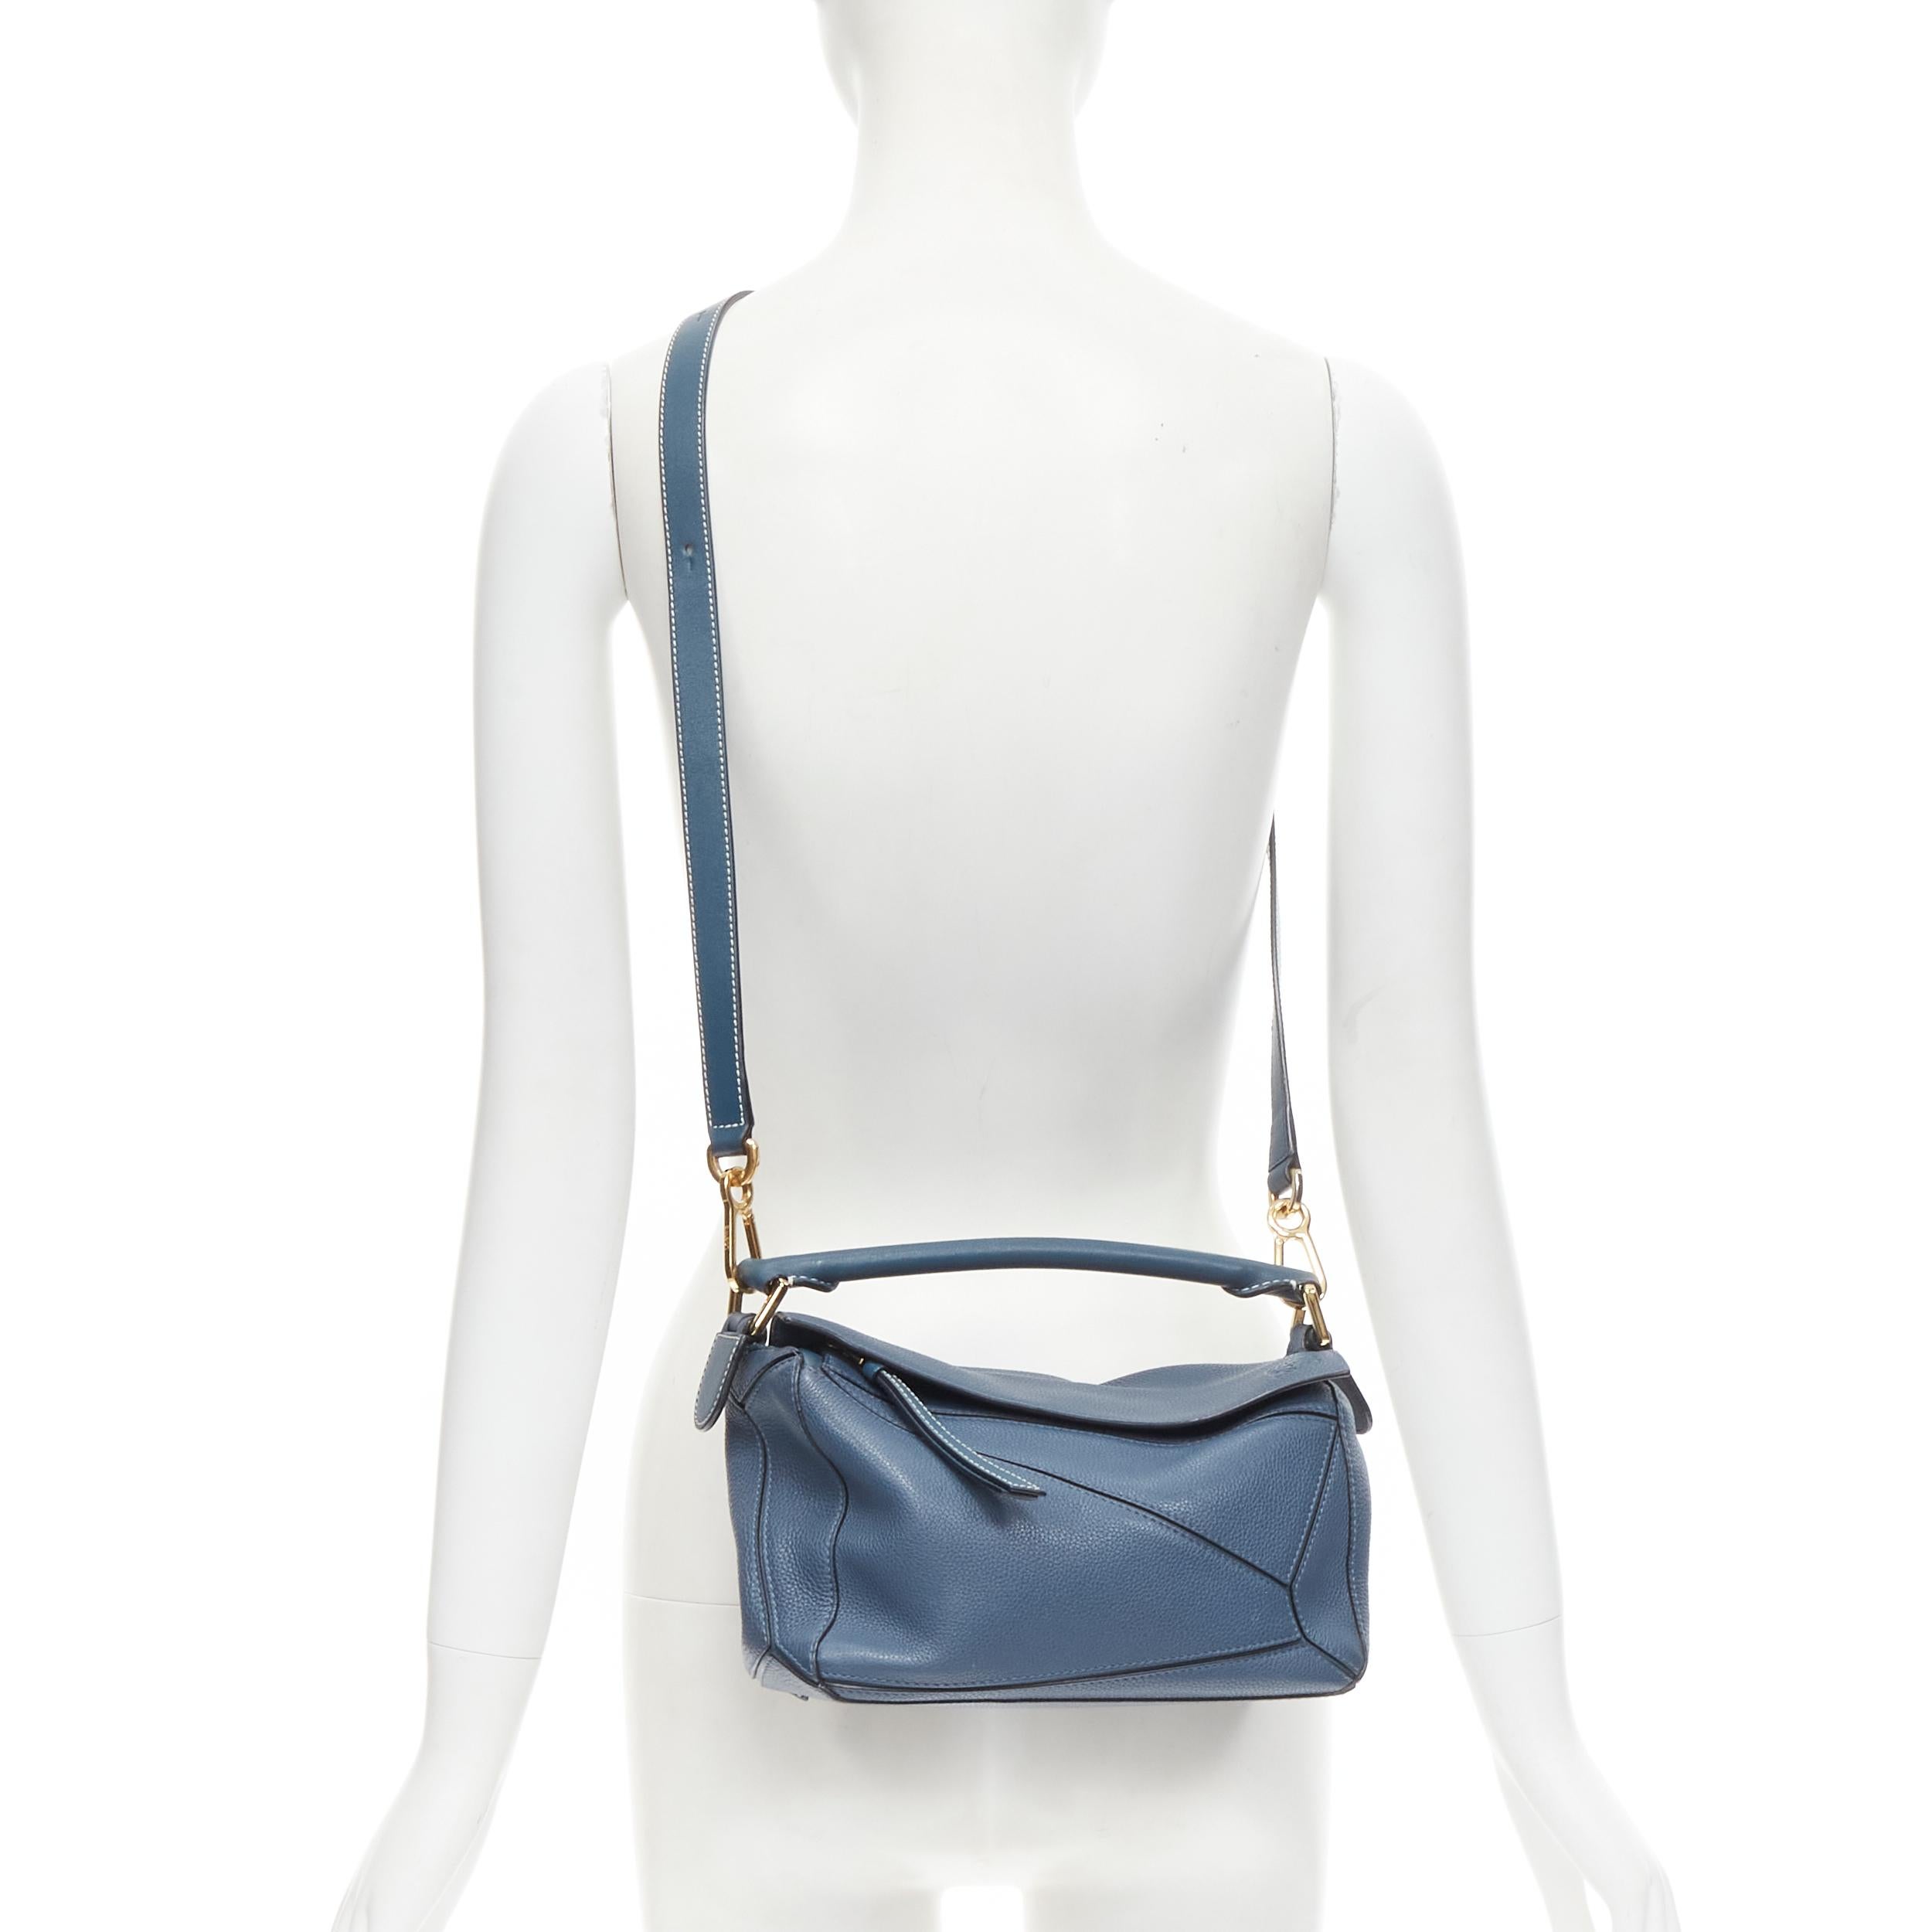 LOEWE Small Puzzle dark blue grained leather gold hardware shoulder bag 
Reference: TGAS/B01615 
Brand: Loewe 
Designer: JW Anderson 
Model: Puzzle Small 
Material: Leather 
Color: Blue 
Pattern: Solid 
Closure: Zip 
Extra Detail: Small Puzzle.